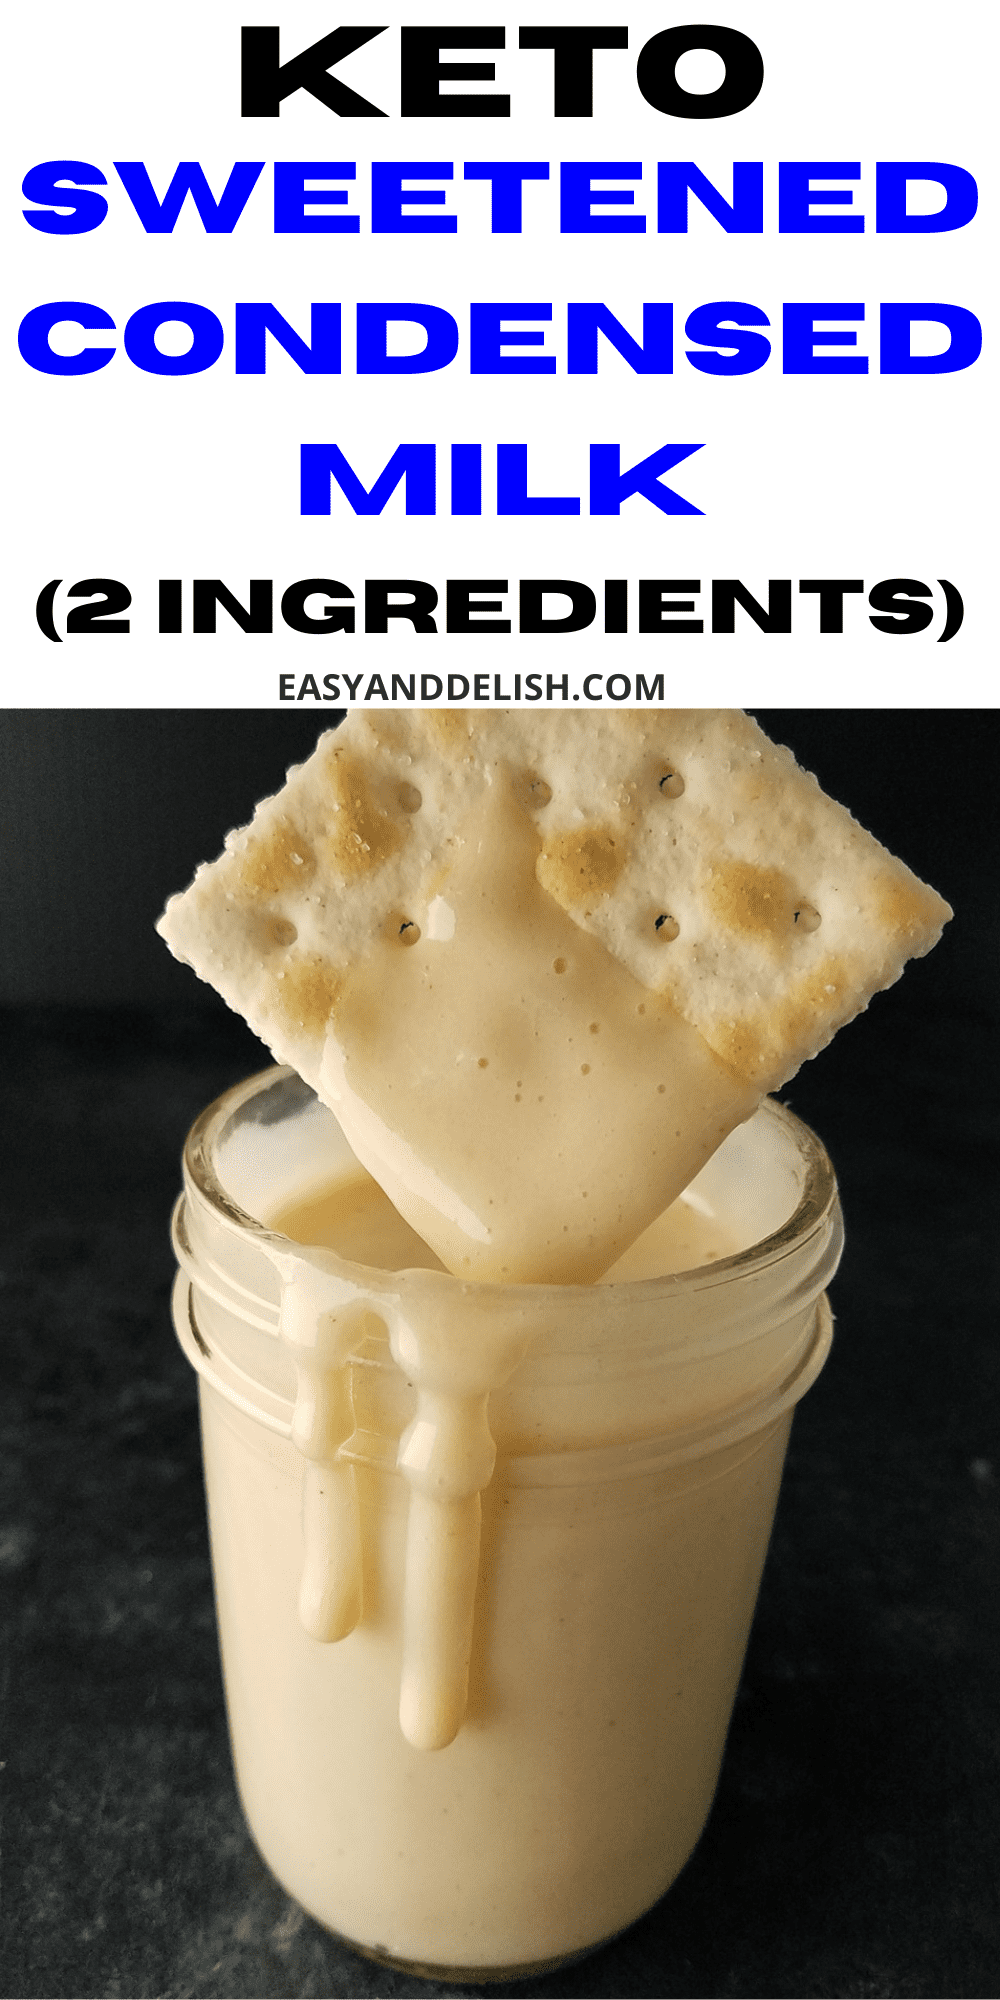 a cracker dipped in keto condensed milk and held over a jar.